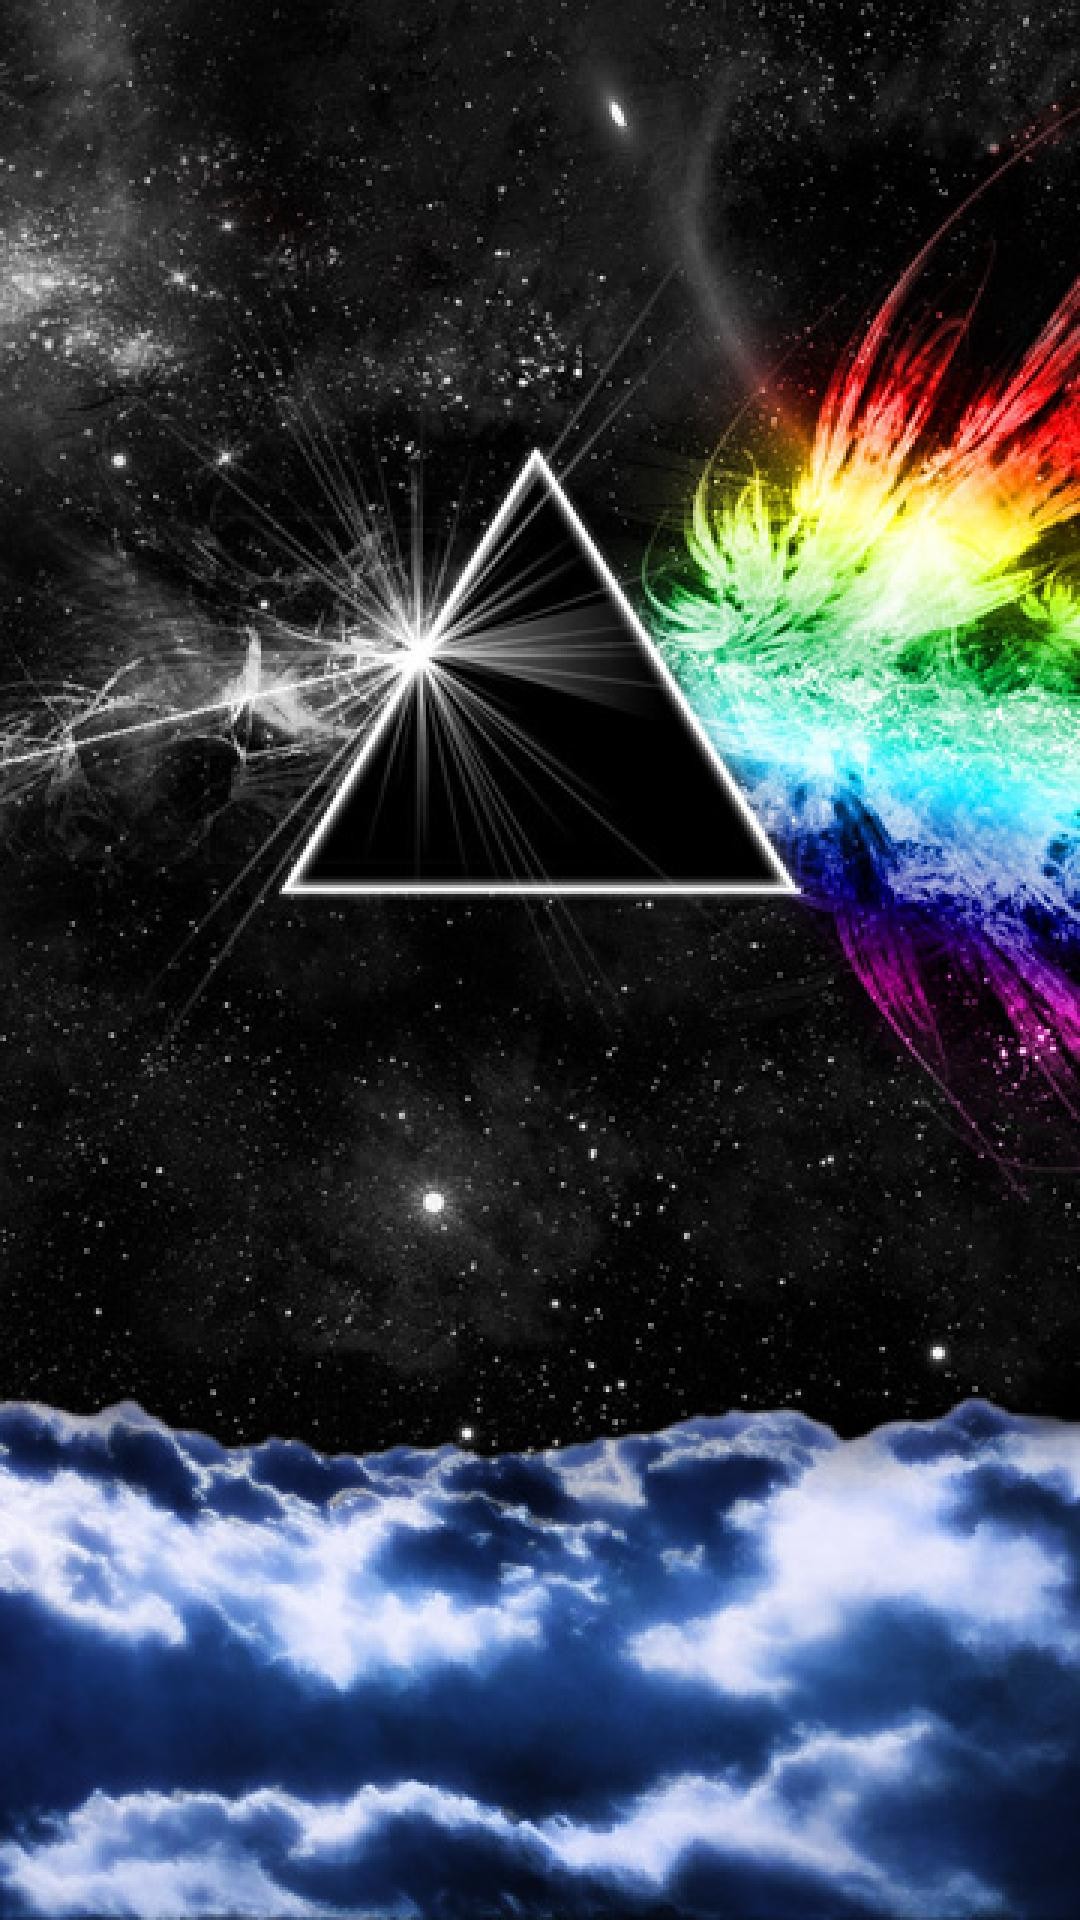 1080x1920 ...  wallpaper.wiki Cool Pink Floyd Iphone Background PIC WPD003600